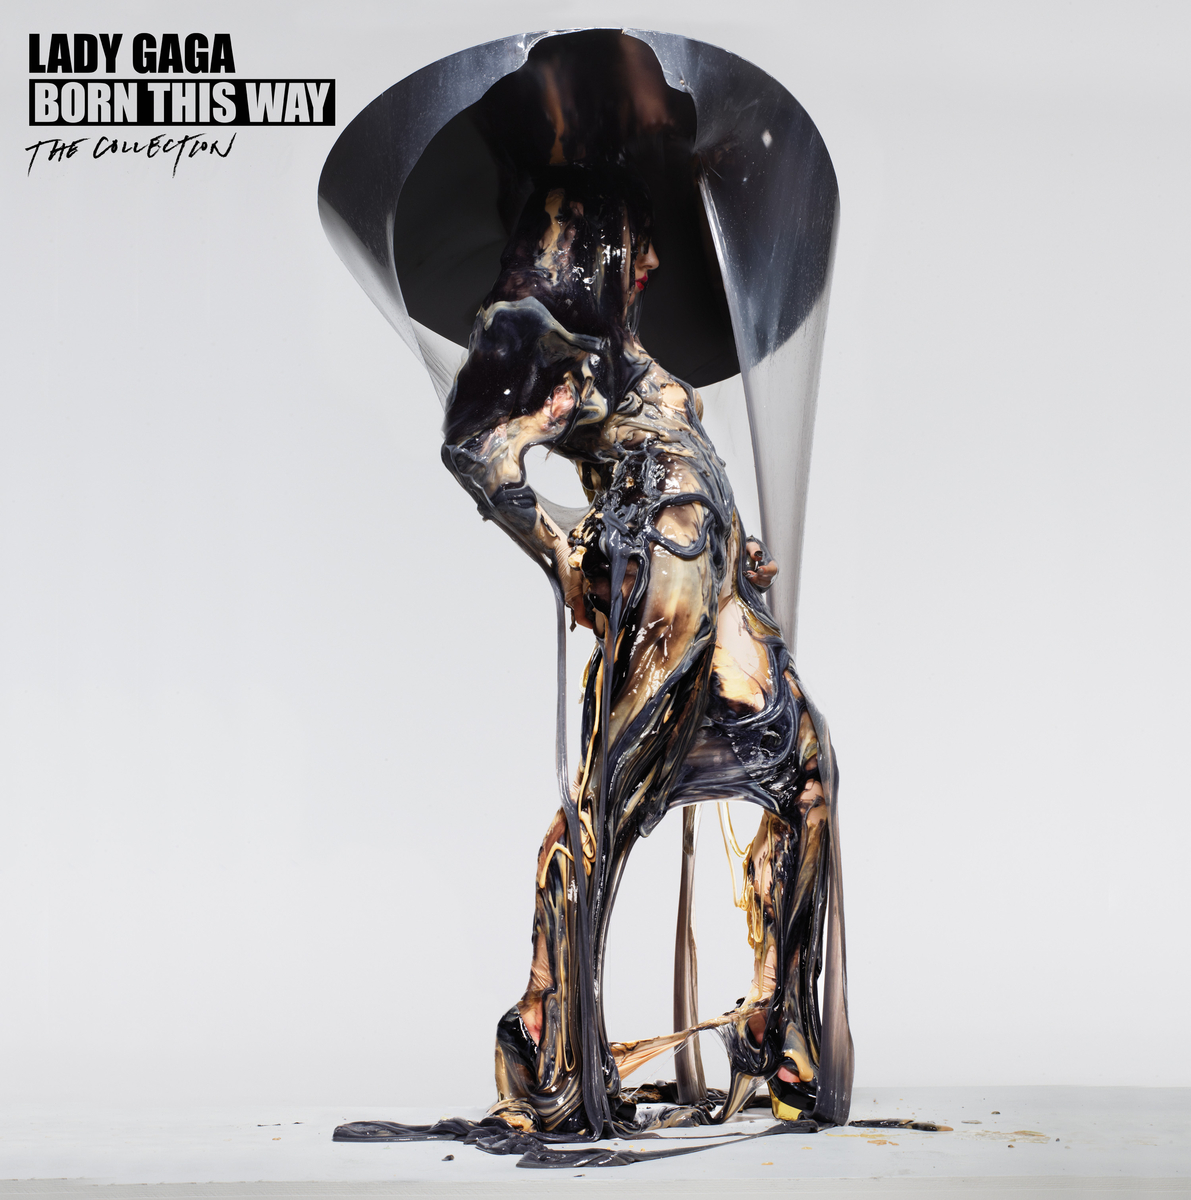 Born This Way: The collection